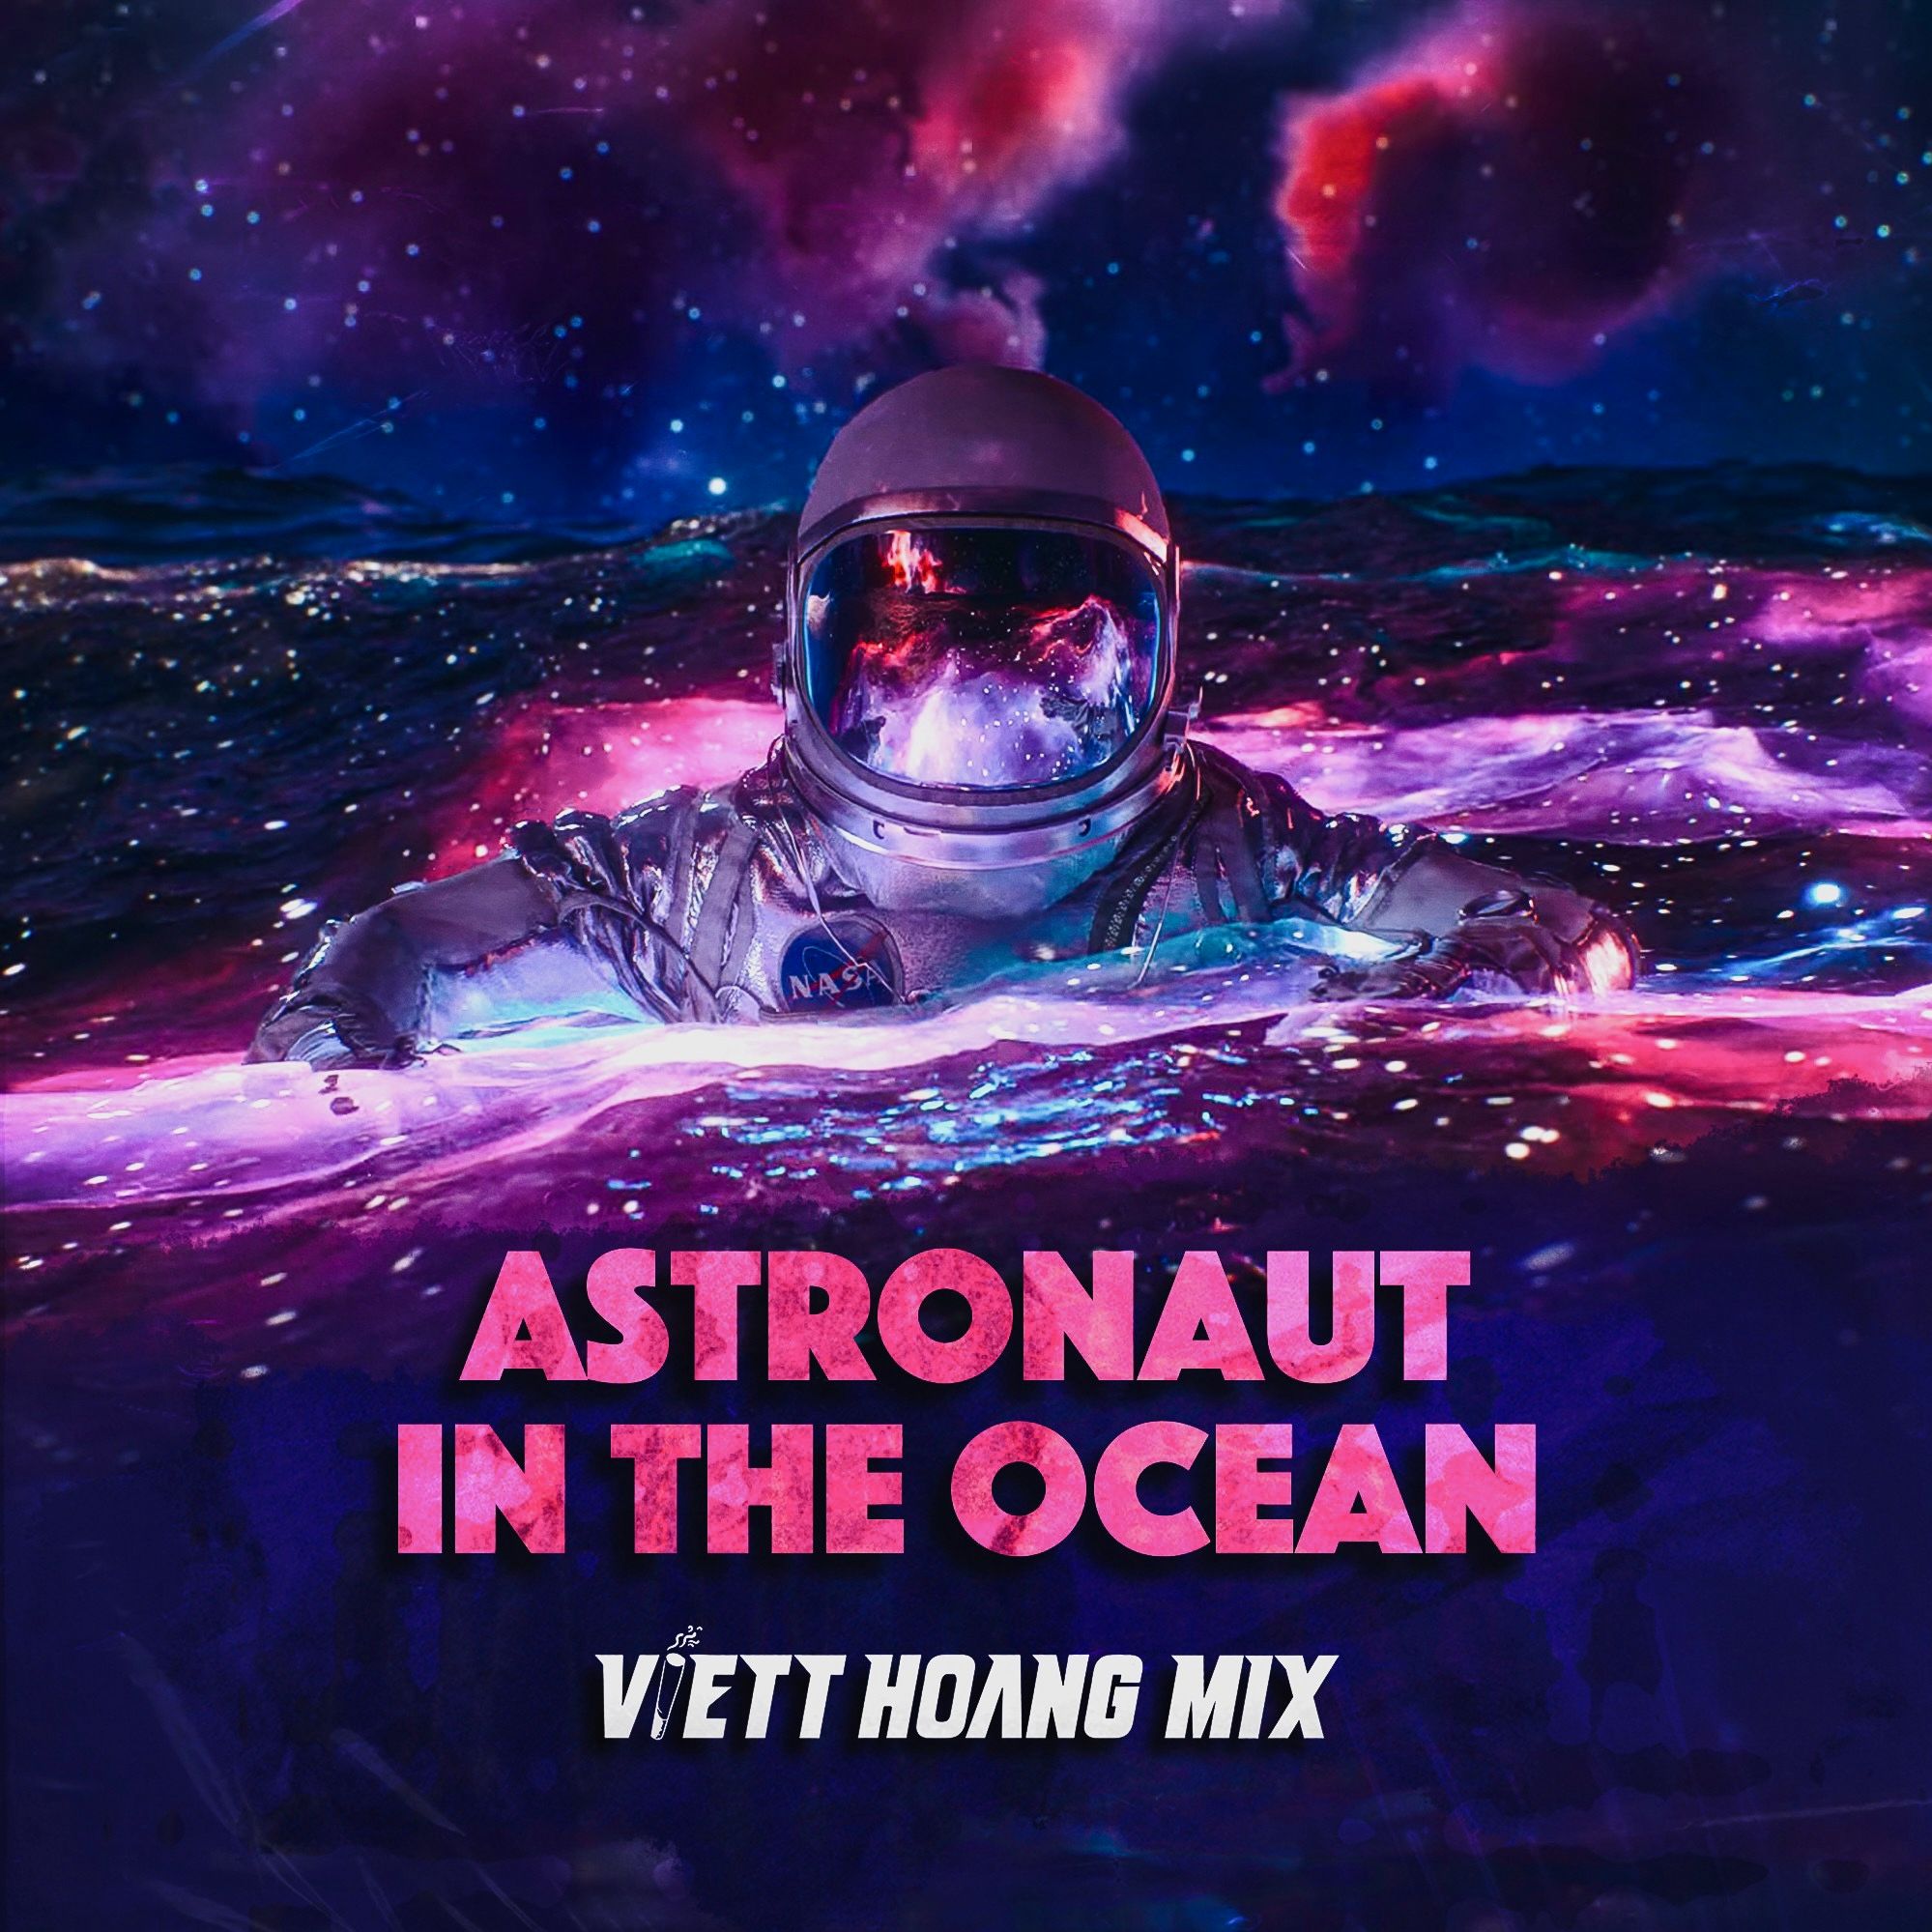 I-download MASKED WOLF - Astronaut in the Ocean - VIETTHOANG MIX